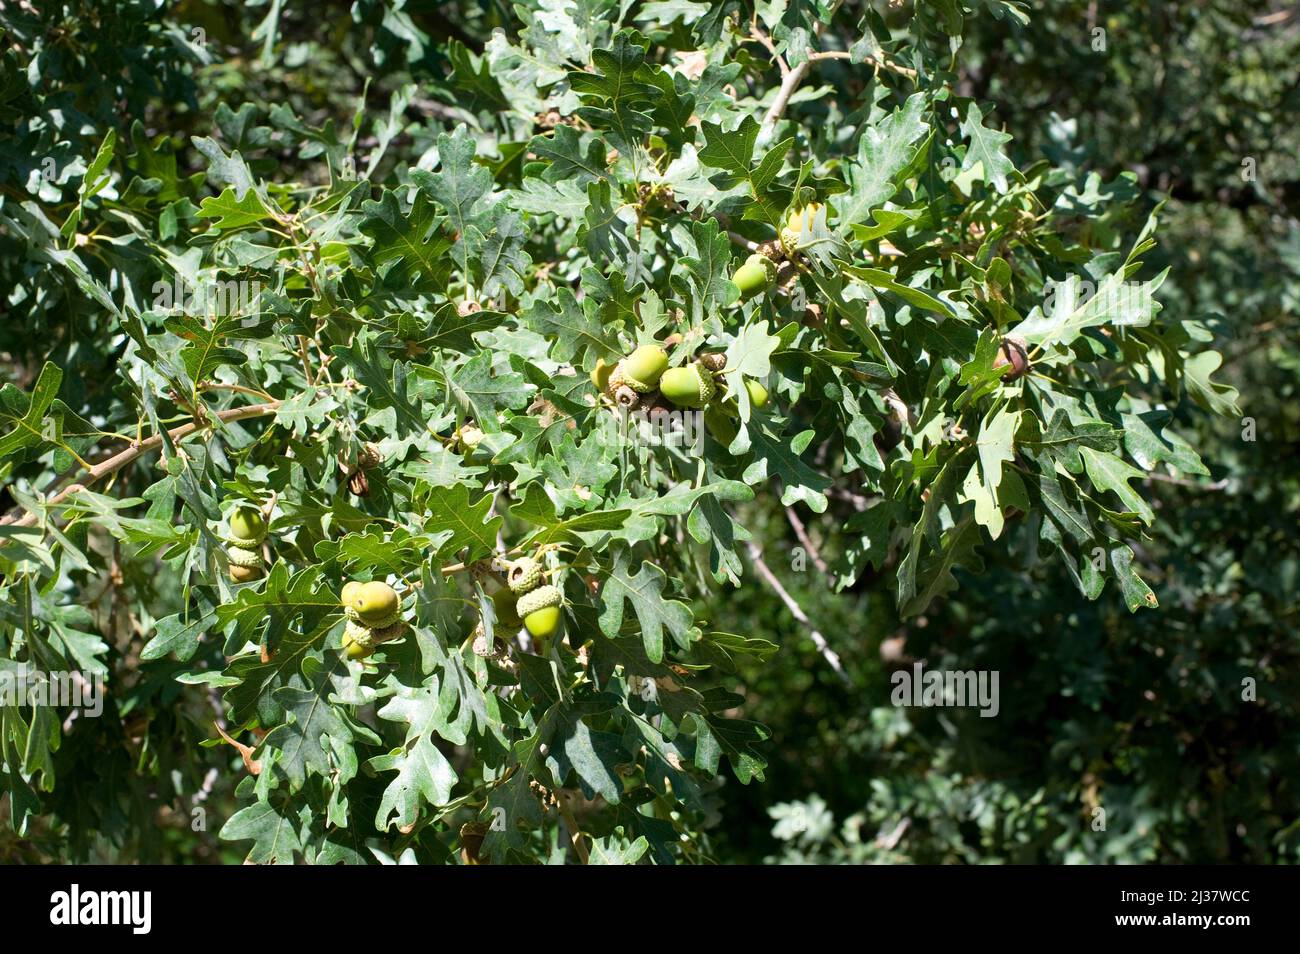 Gambel oak (Quercus gambelii) is a deciduous small tree native to central western USA. Fruits (acorns) and leaves detail. This photo was taken in Stock Photo